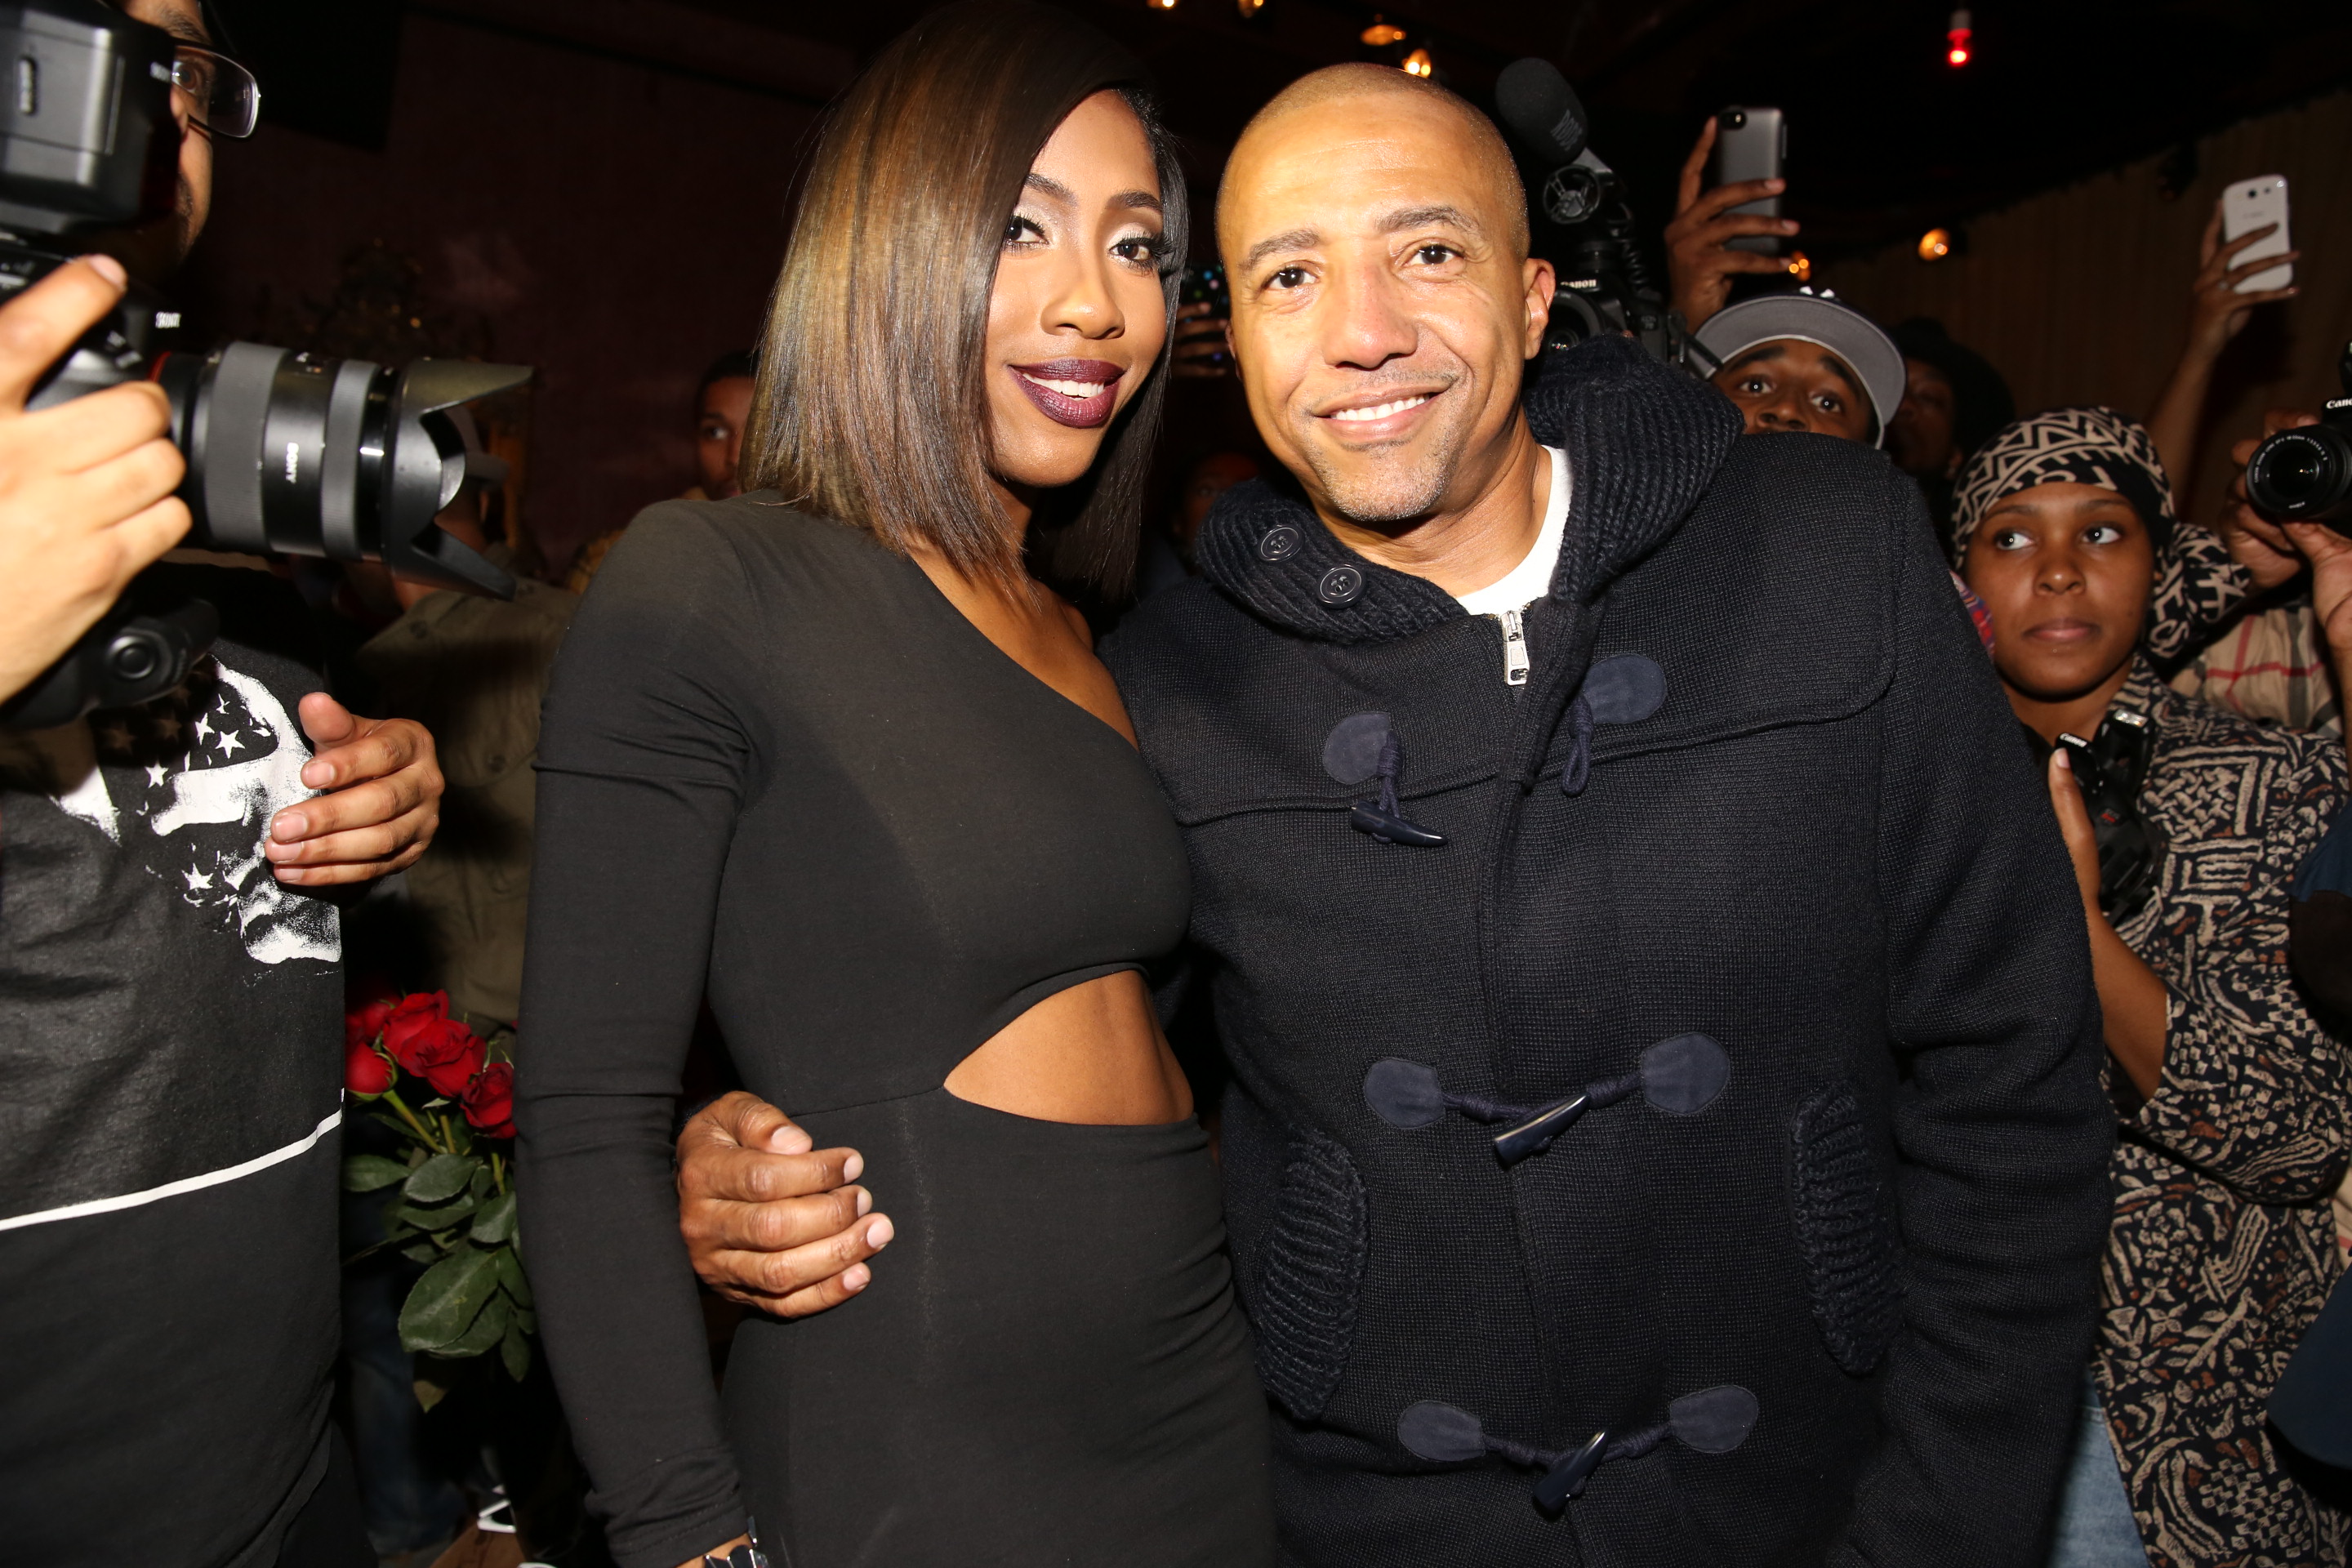 Event Recap & Photos: Sevyn "Call Me Crazy, But..." EP Release Event in NYC 12/2/13